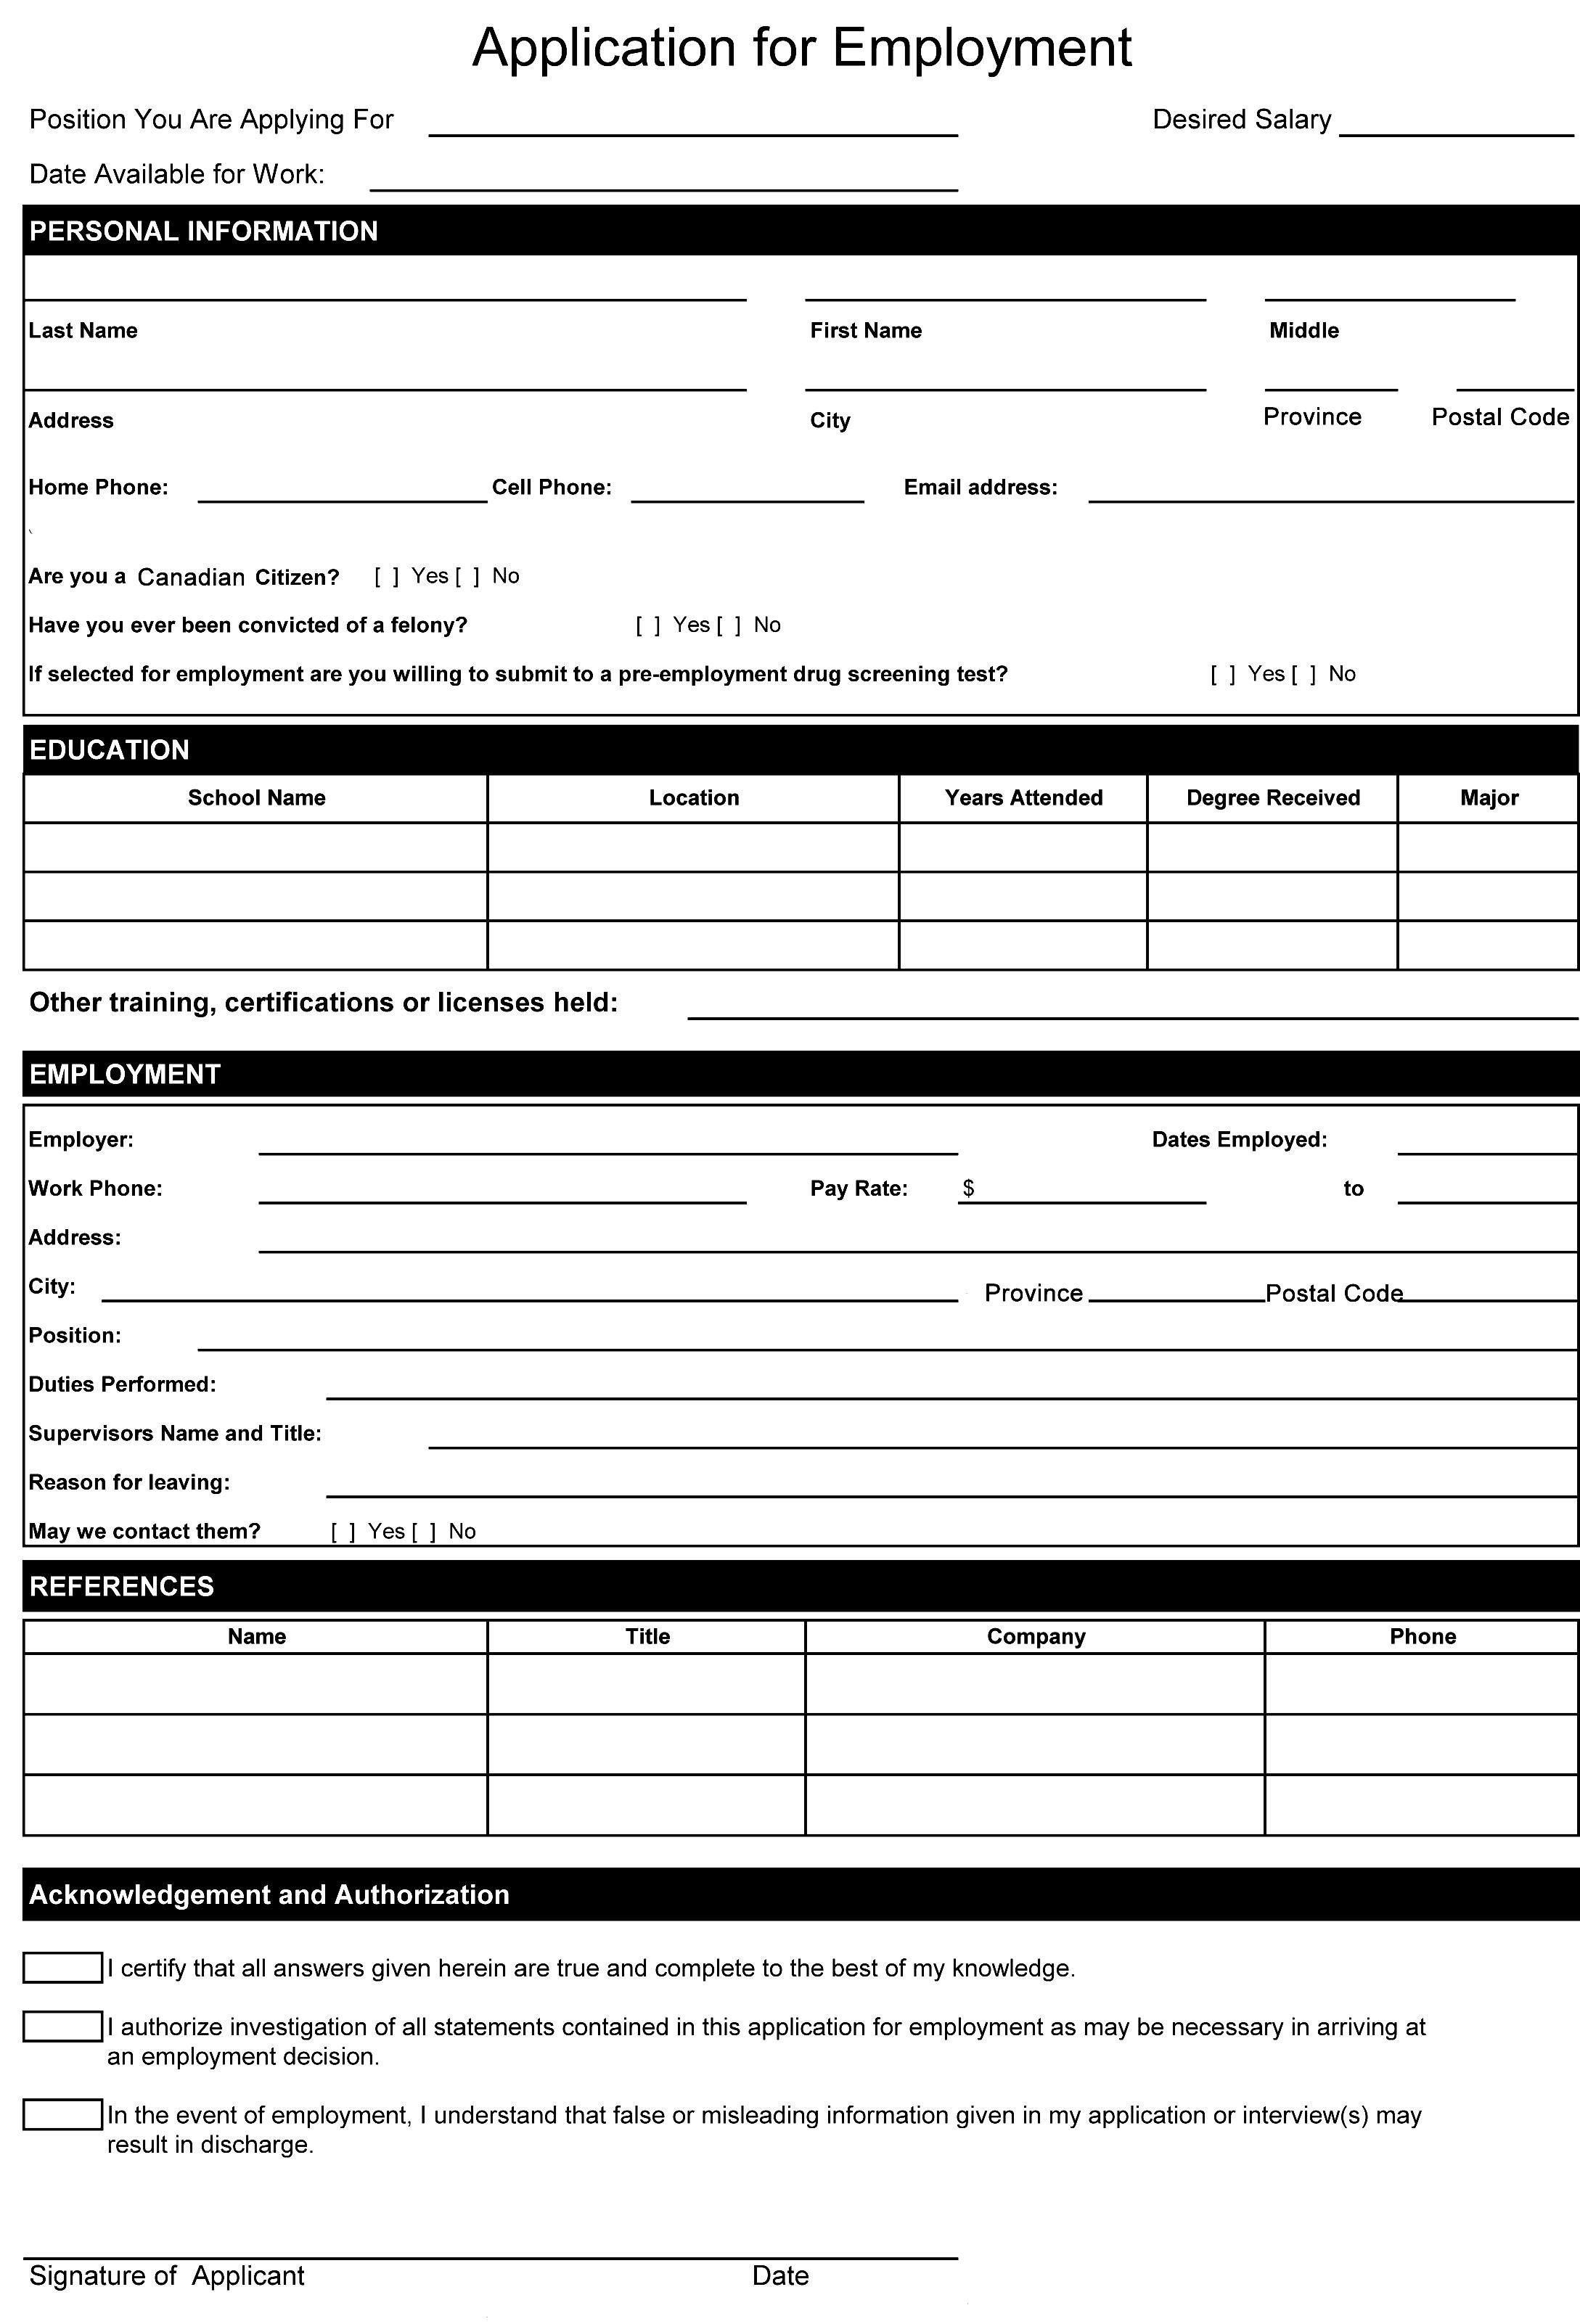 Resume Format Word Document | Resume Format | Job Application Form - Free Printable Application For Employment Template